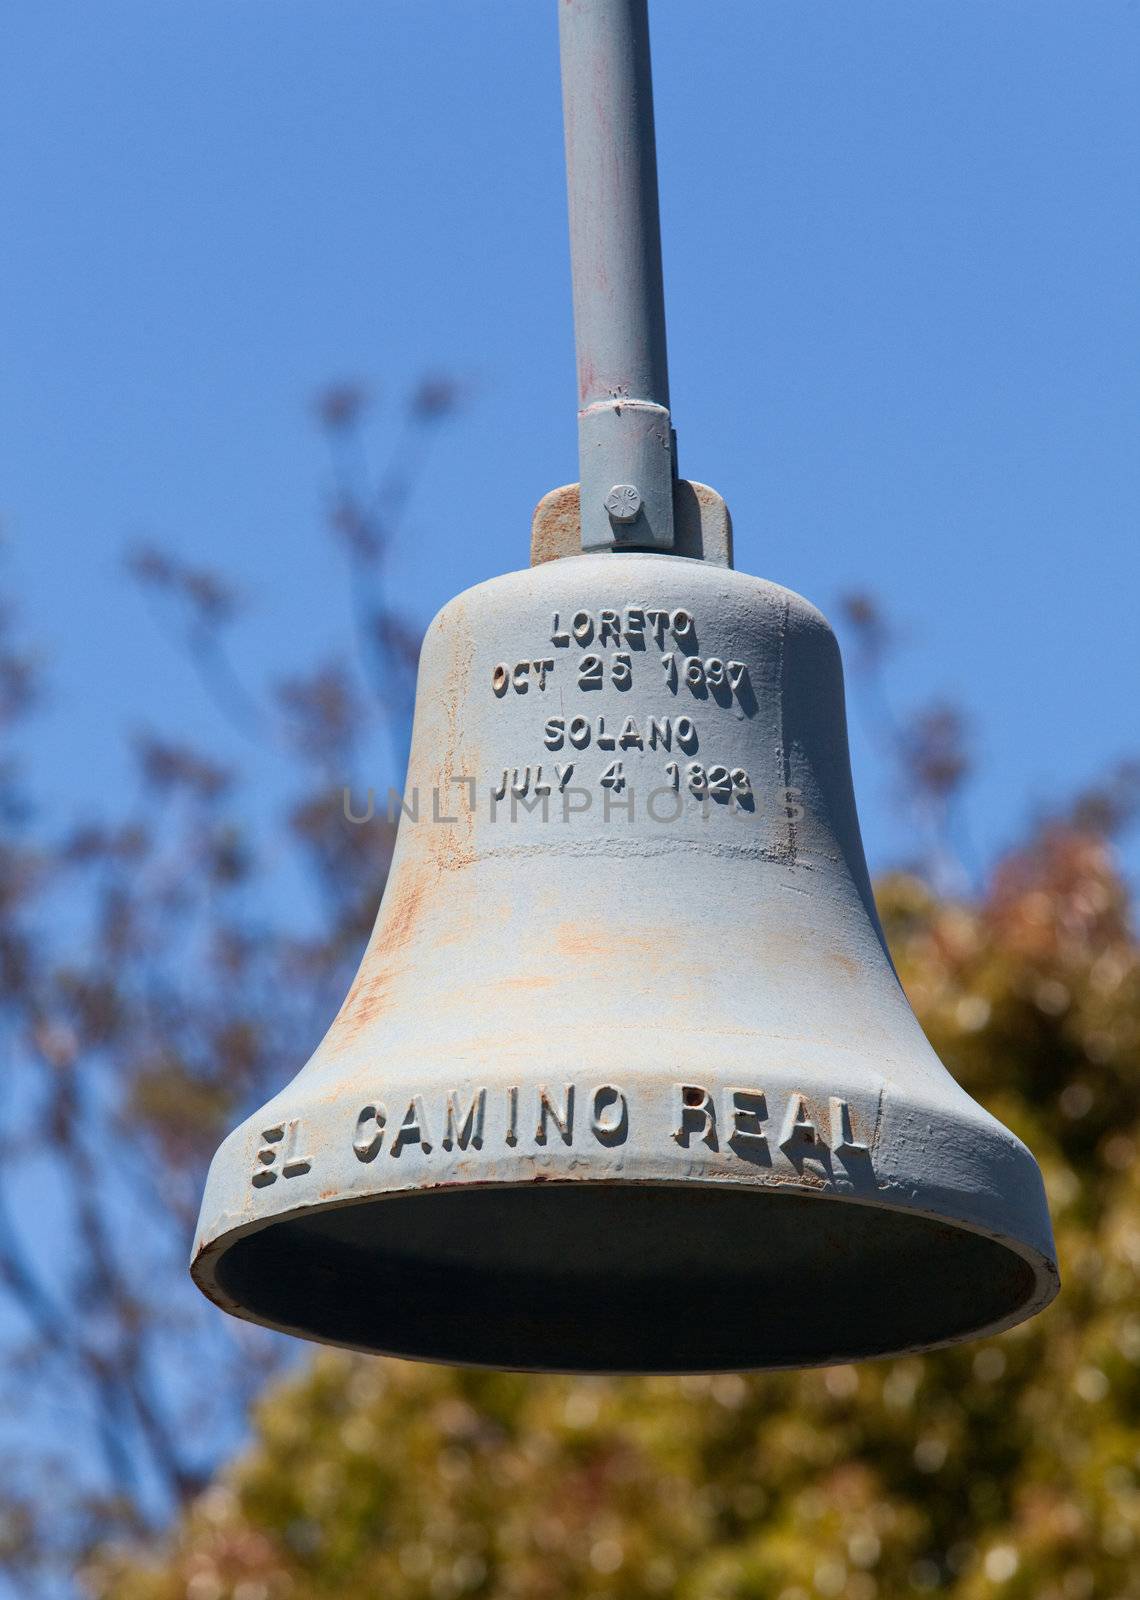 Camino Real Bell by steheap